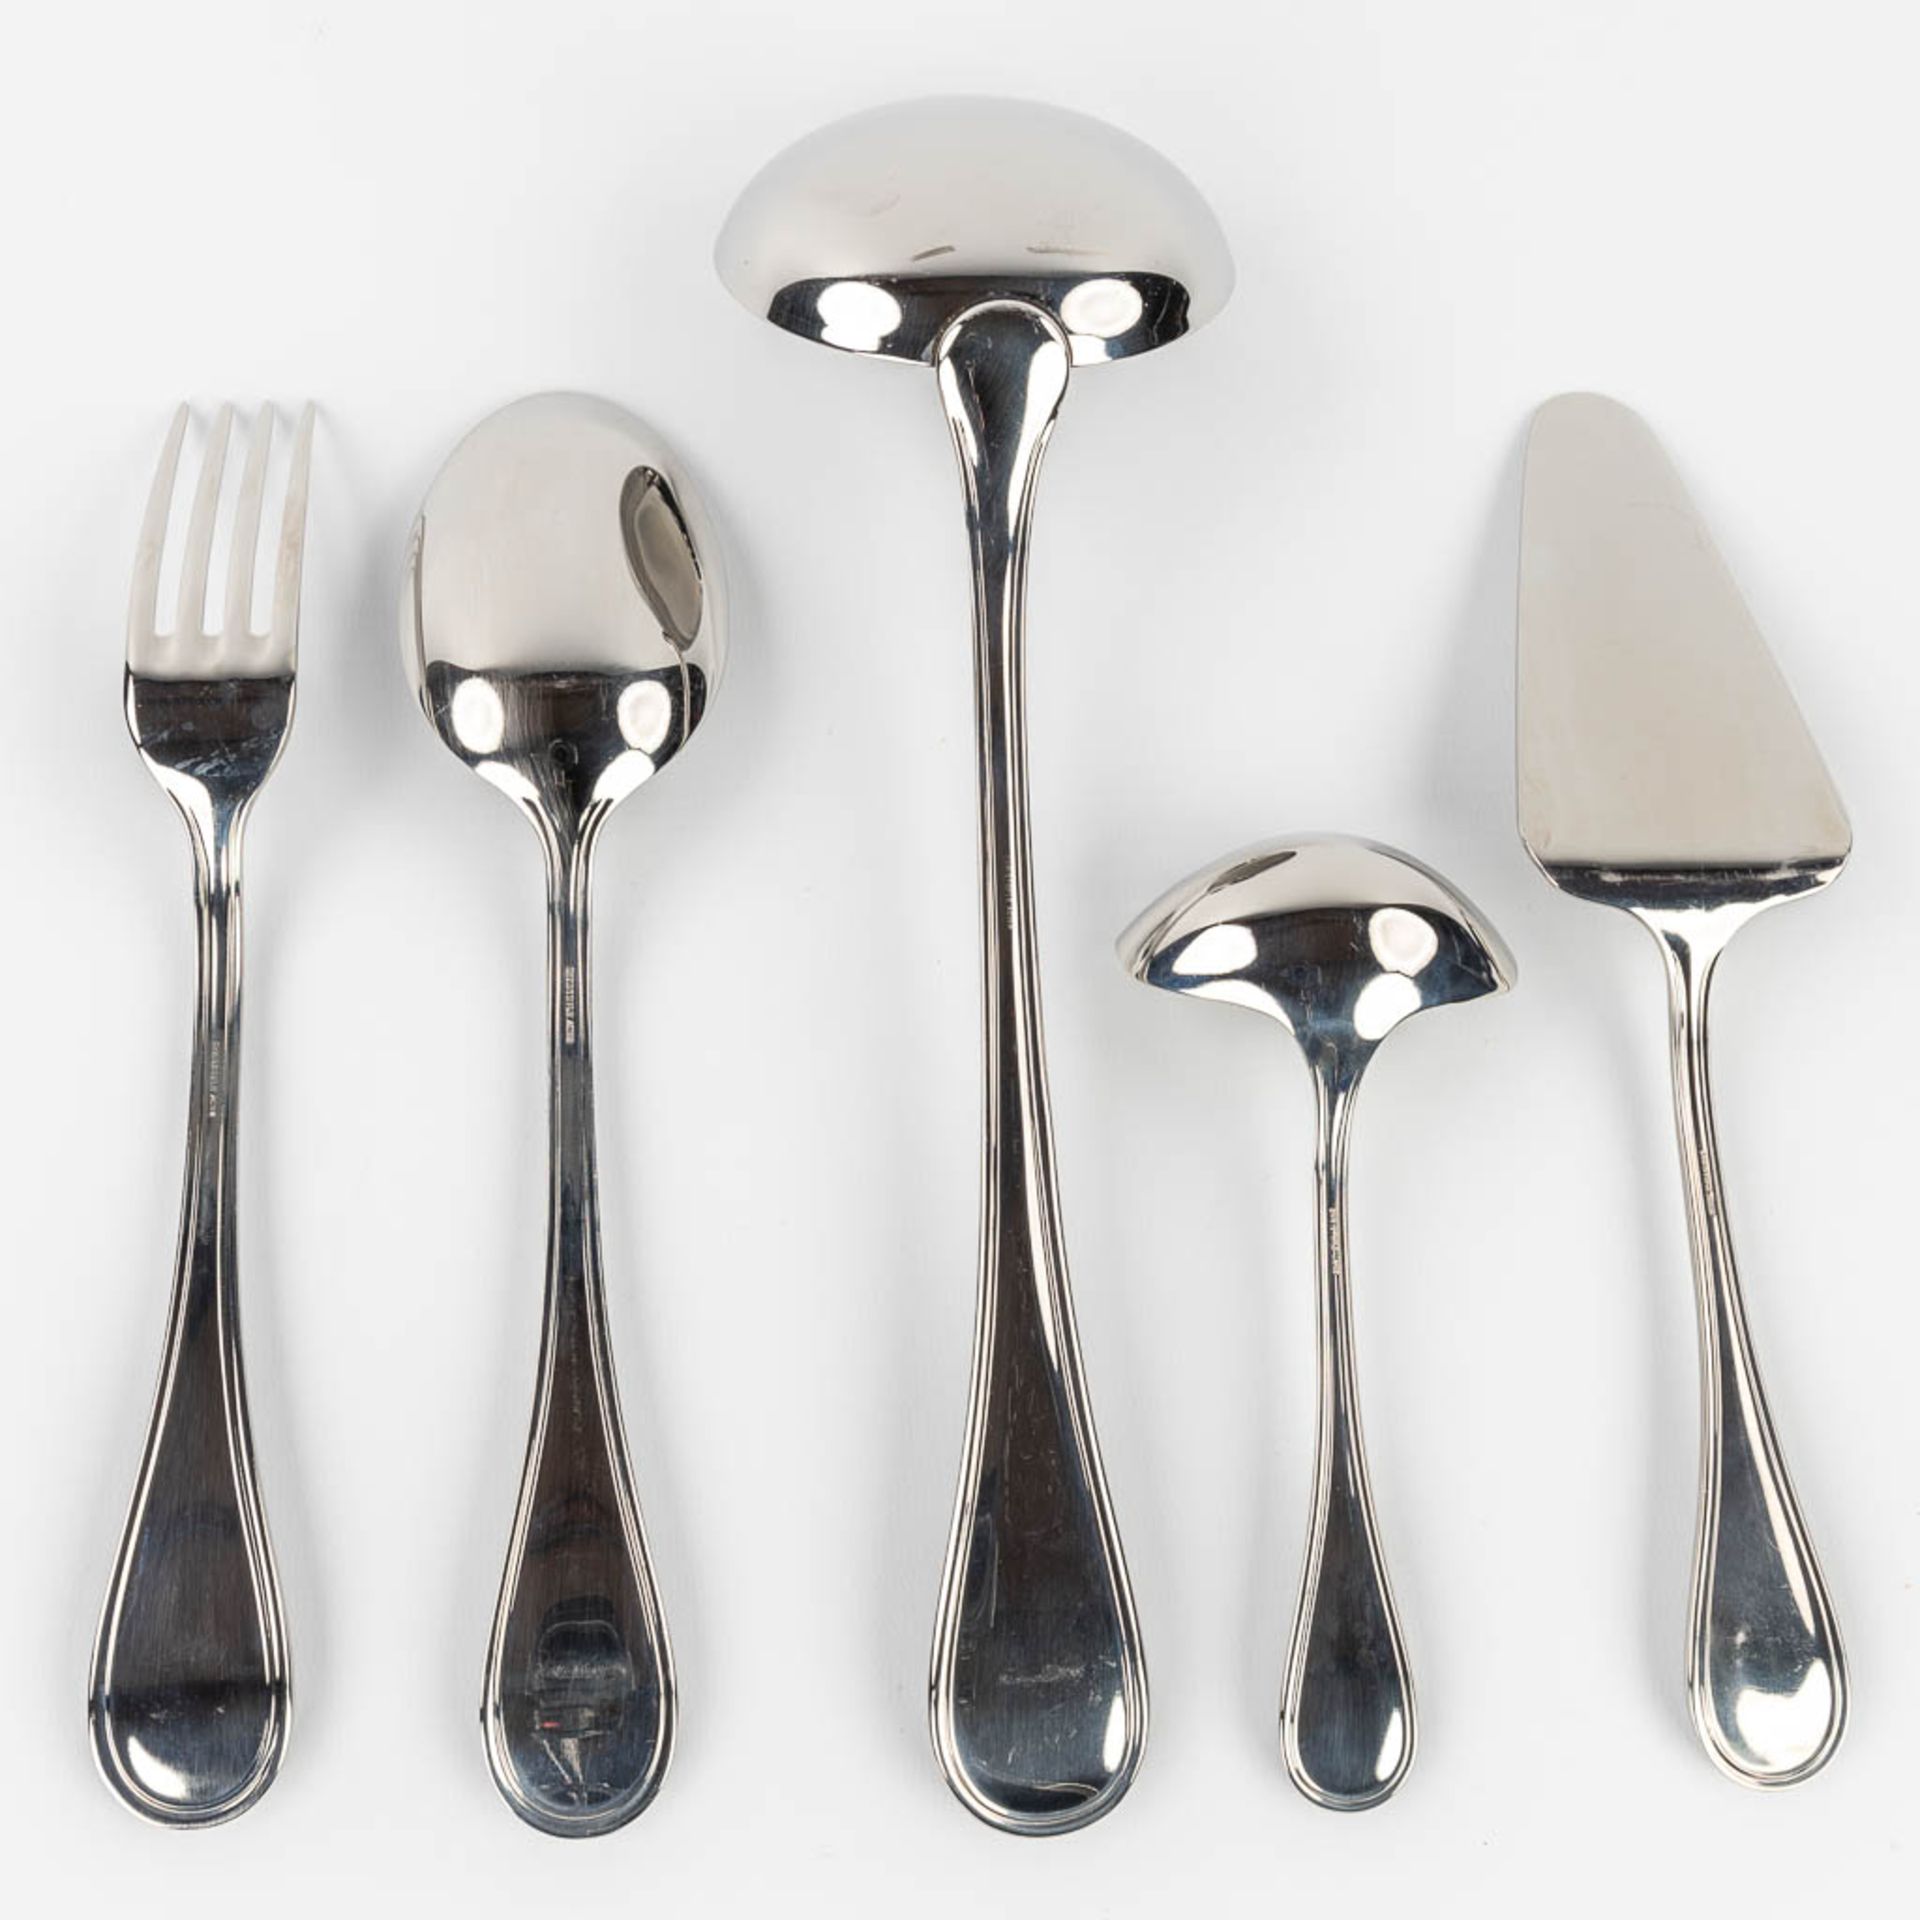 Christofle, model 'Albi' in an 'ambassador 125' case, a 124-piece flatware set, stainless steel. (L - Image 4 of 12